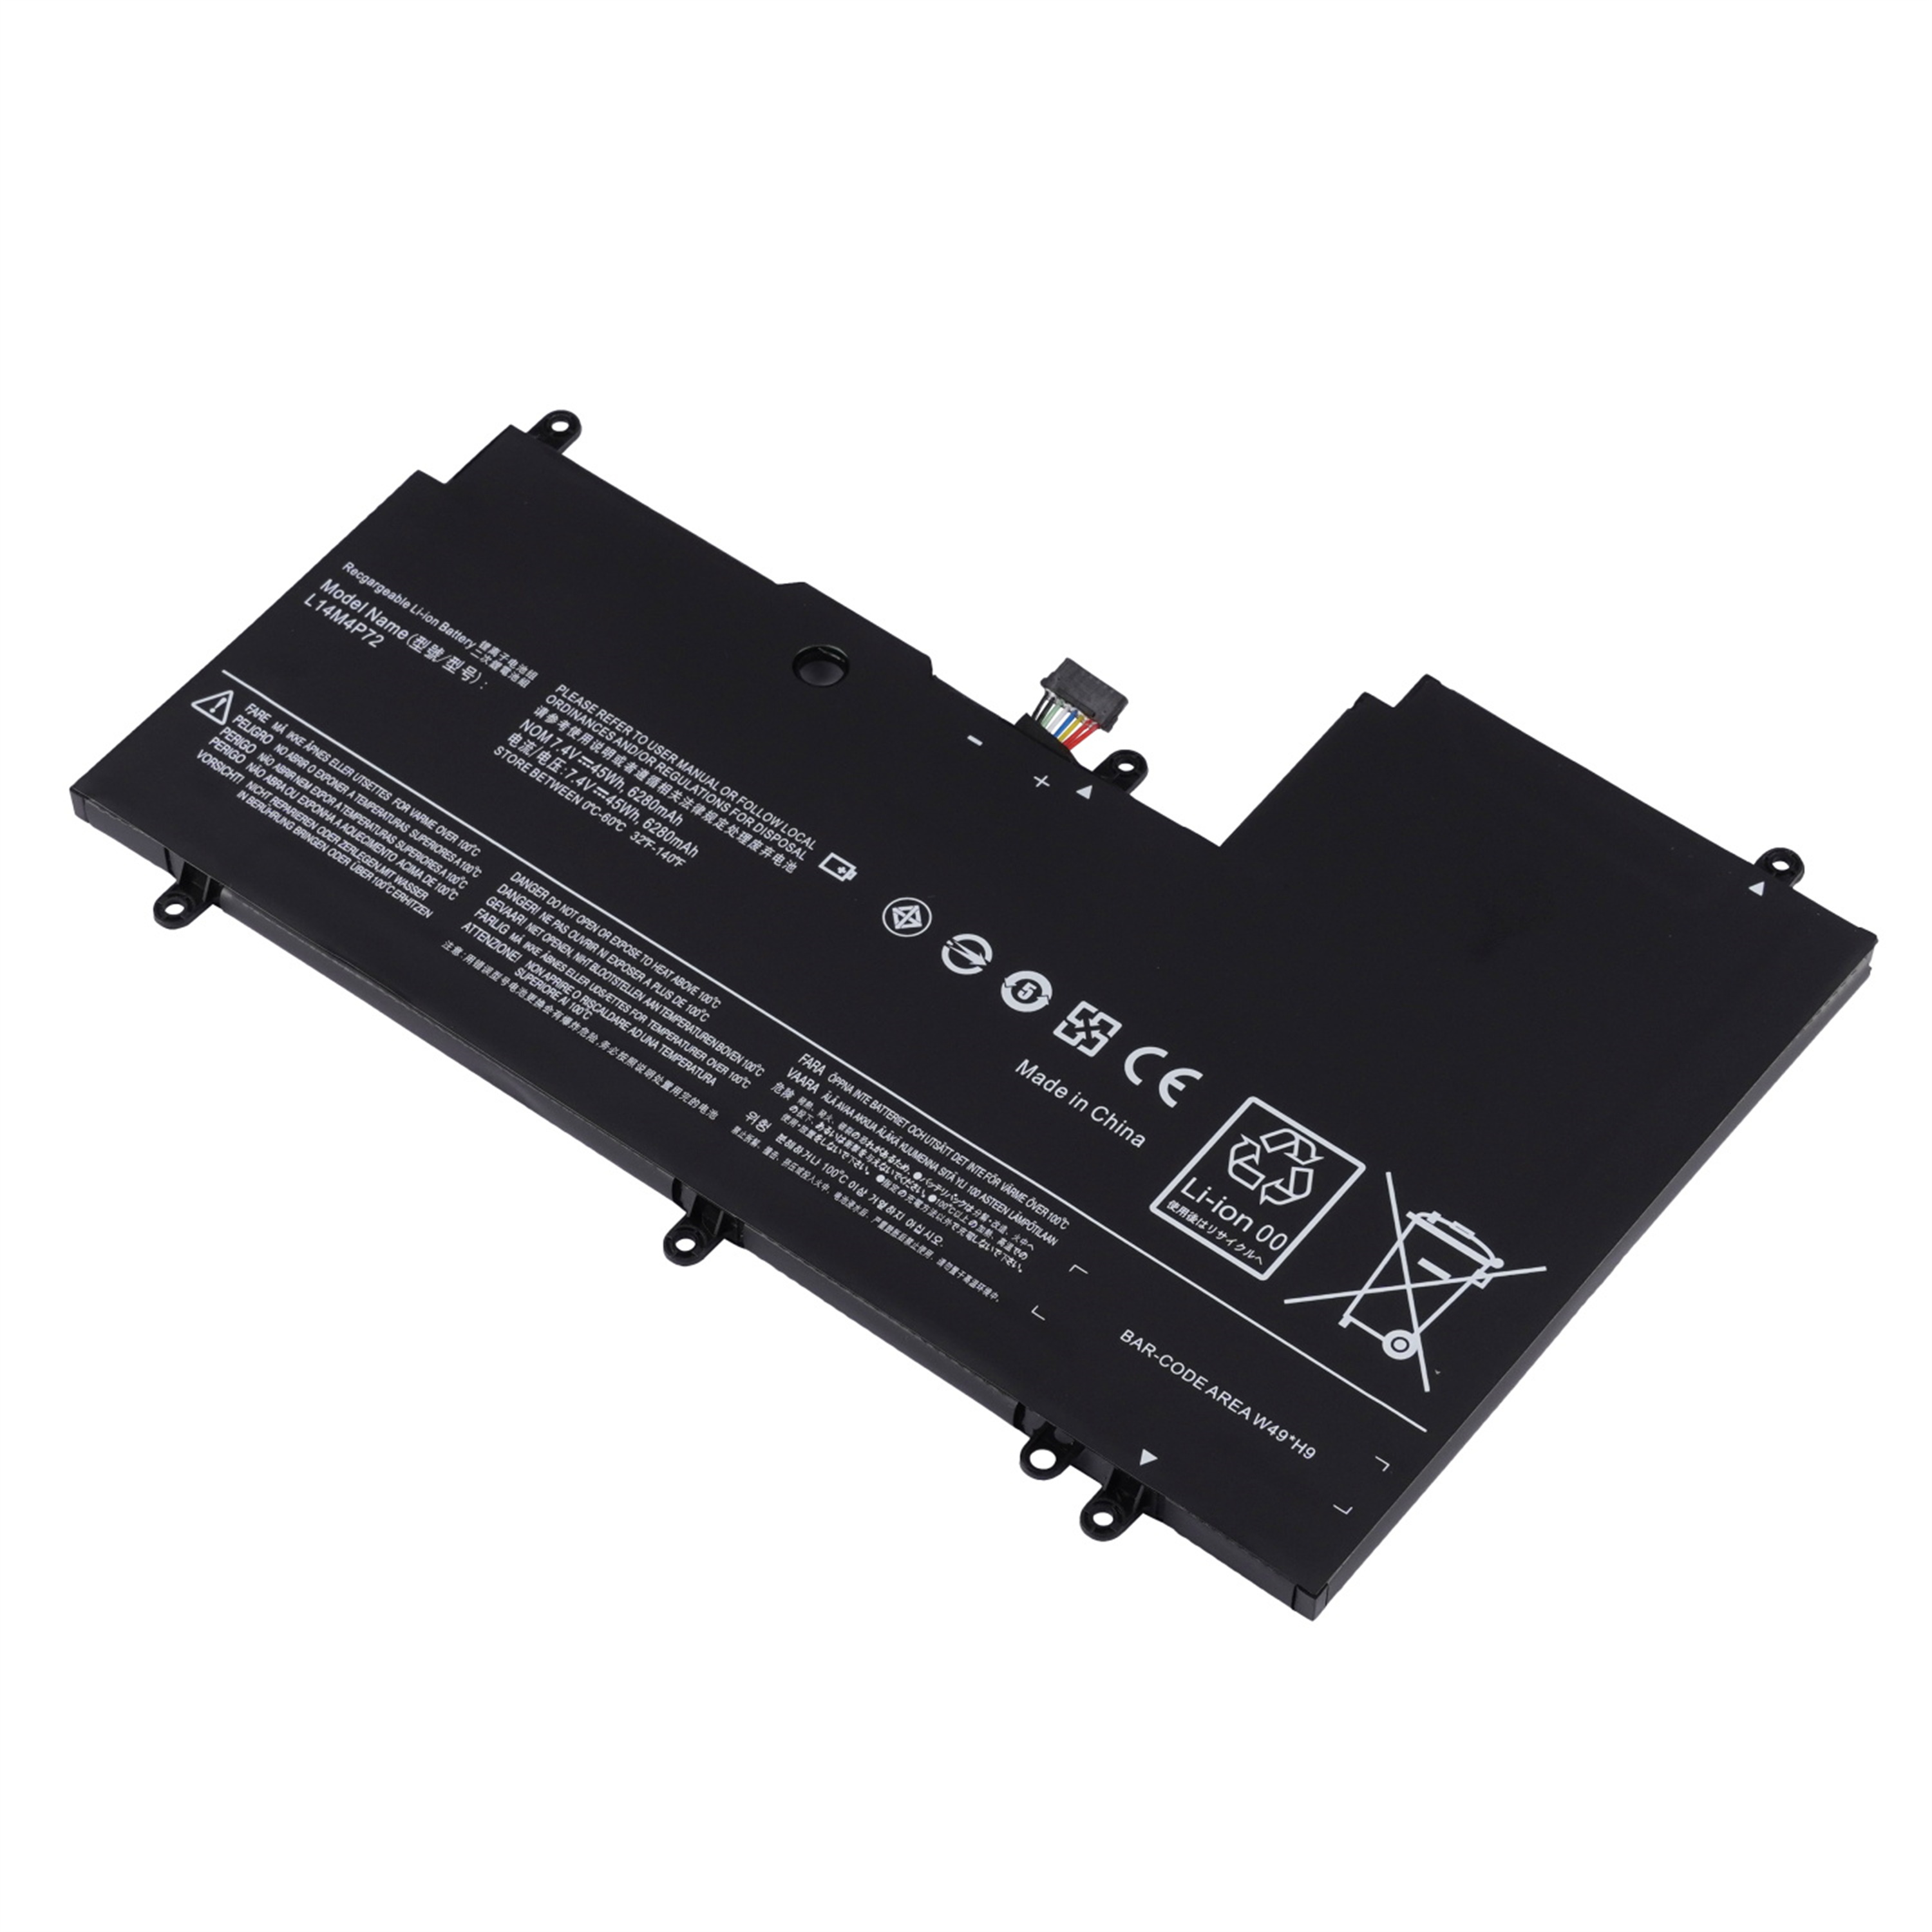 L14M4P72 rechargeable lithium ion Notebook battery Laptop battery For with Lenovo Yoga 3 14 Yoga 3 14-IFI Yoga 3 14-ISE Yoga 700-14ISK Yoga 700-14ISE Yoga 700-14IFI